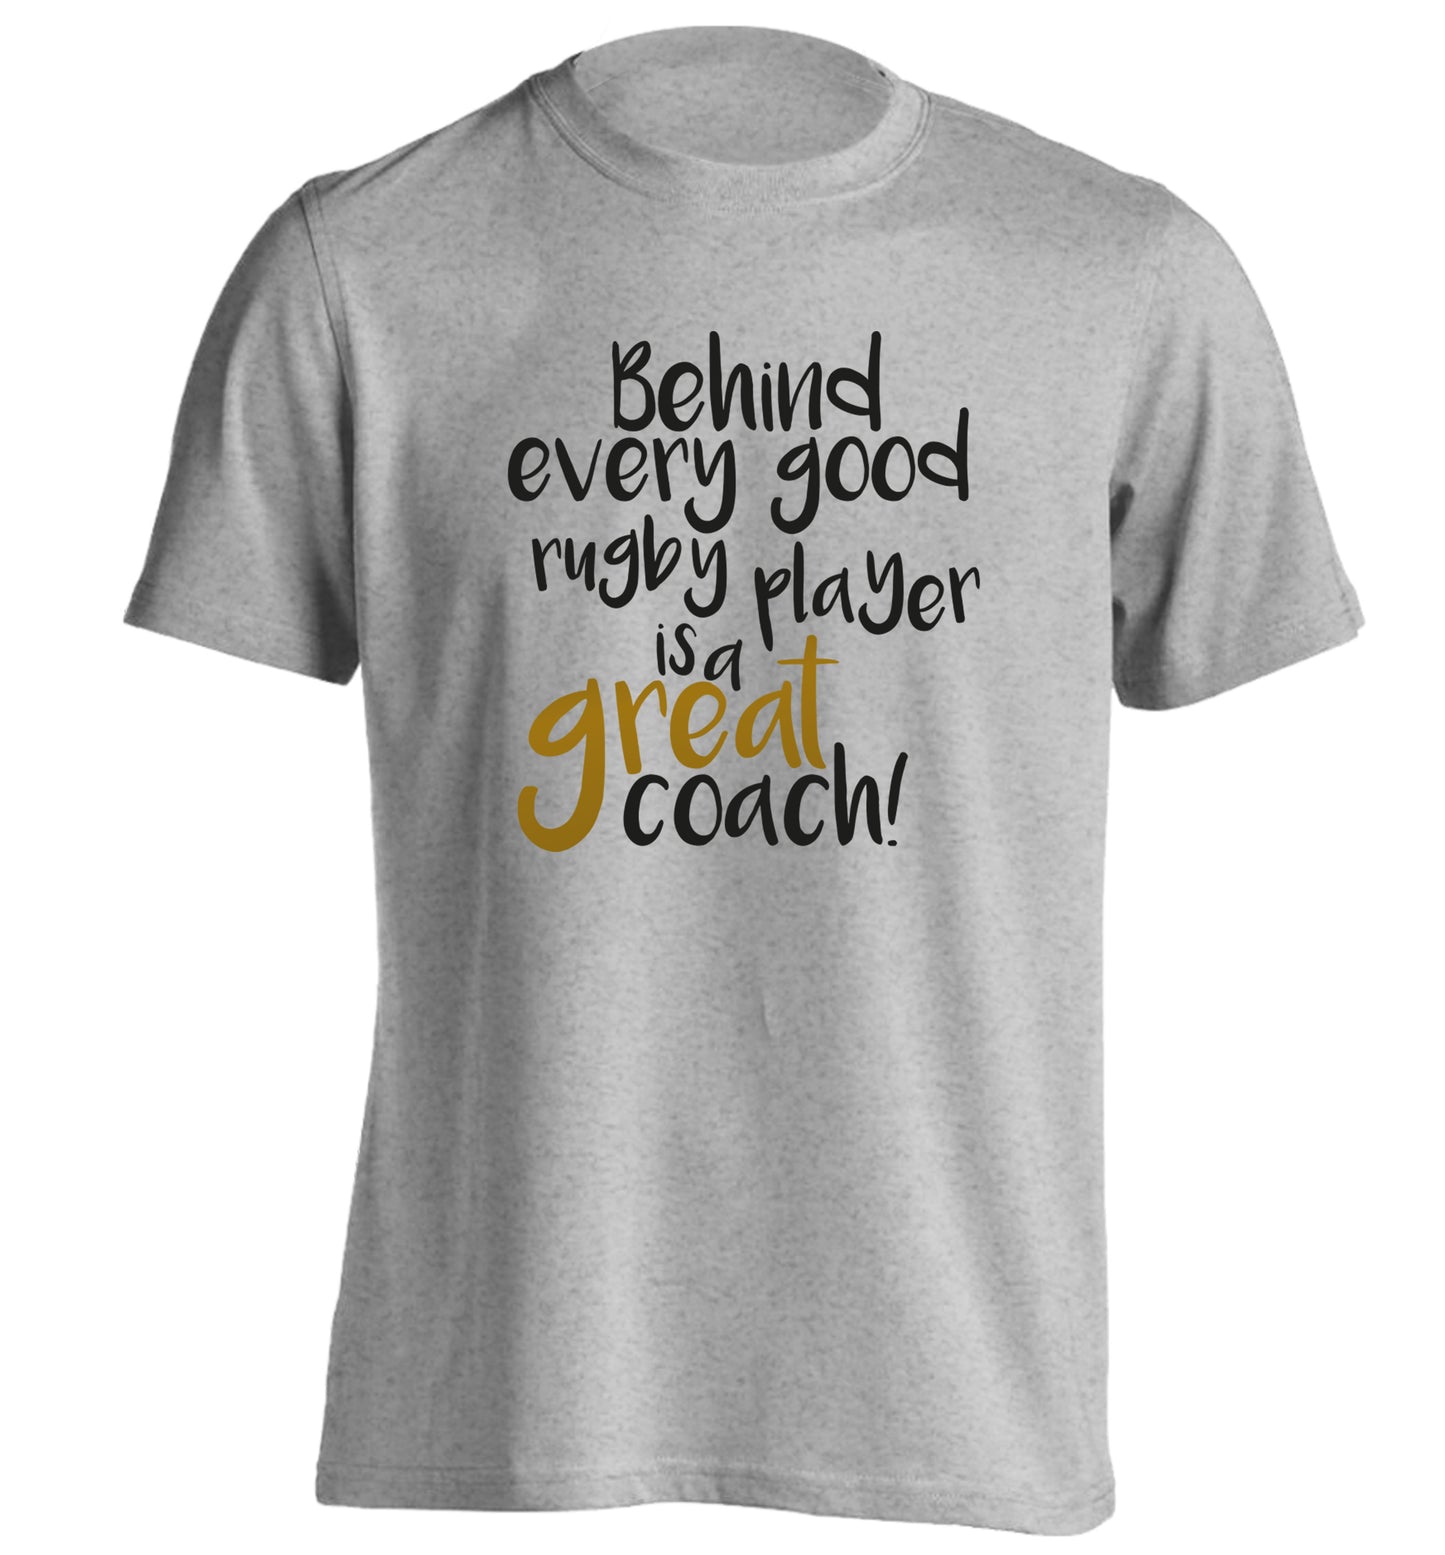 Behind every goor rugby player is a great coach adults unisex grey Tshirt 2XL